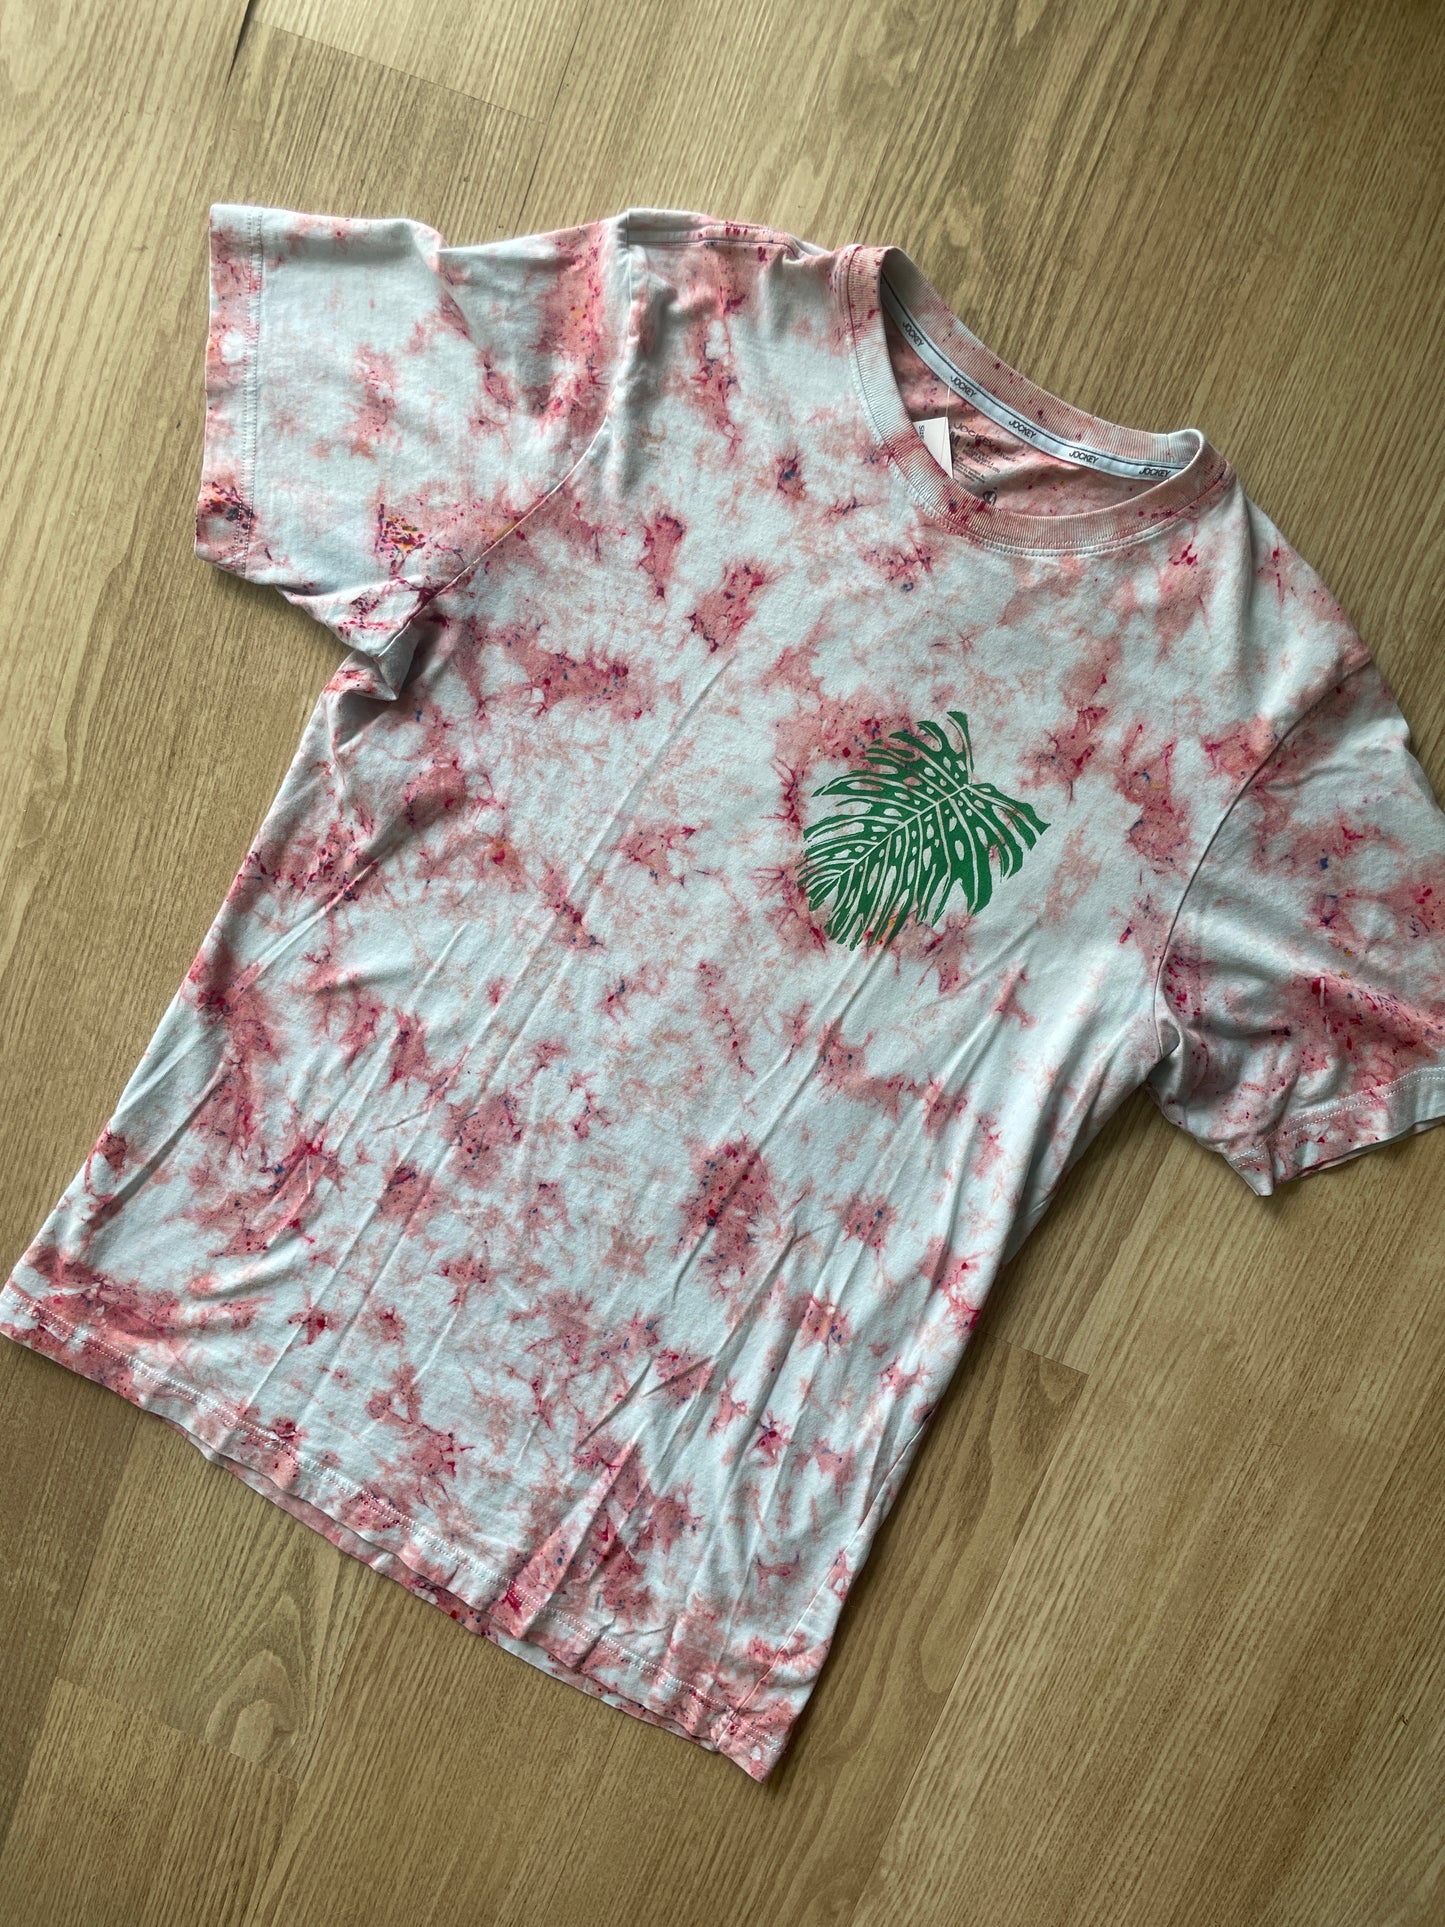 MEDIUM Men’s Monstera Leaf Tie Dye T-Shirt | One-Of-a-Kind Pastel Pink and White Crumpled Short Sleeve